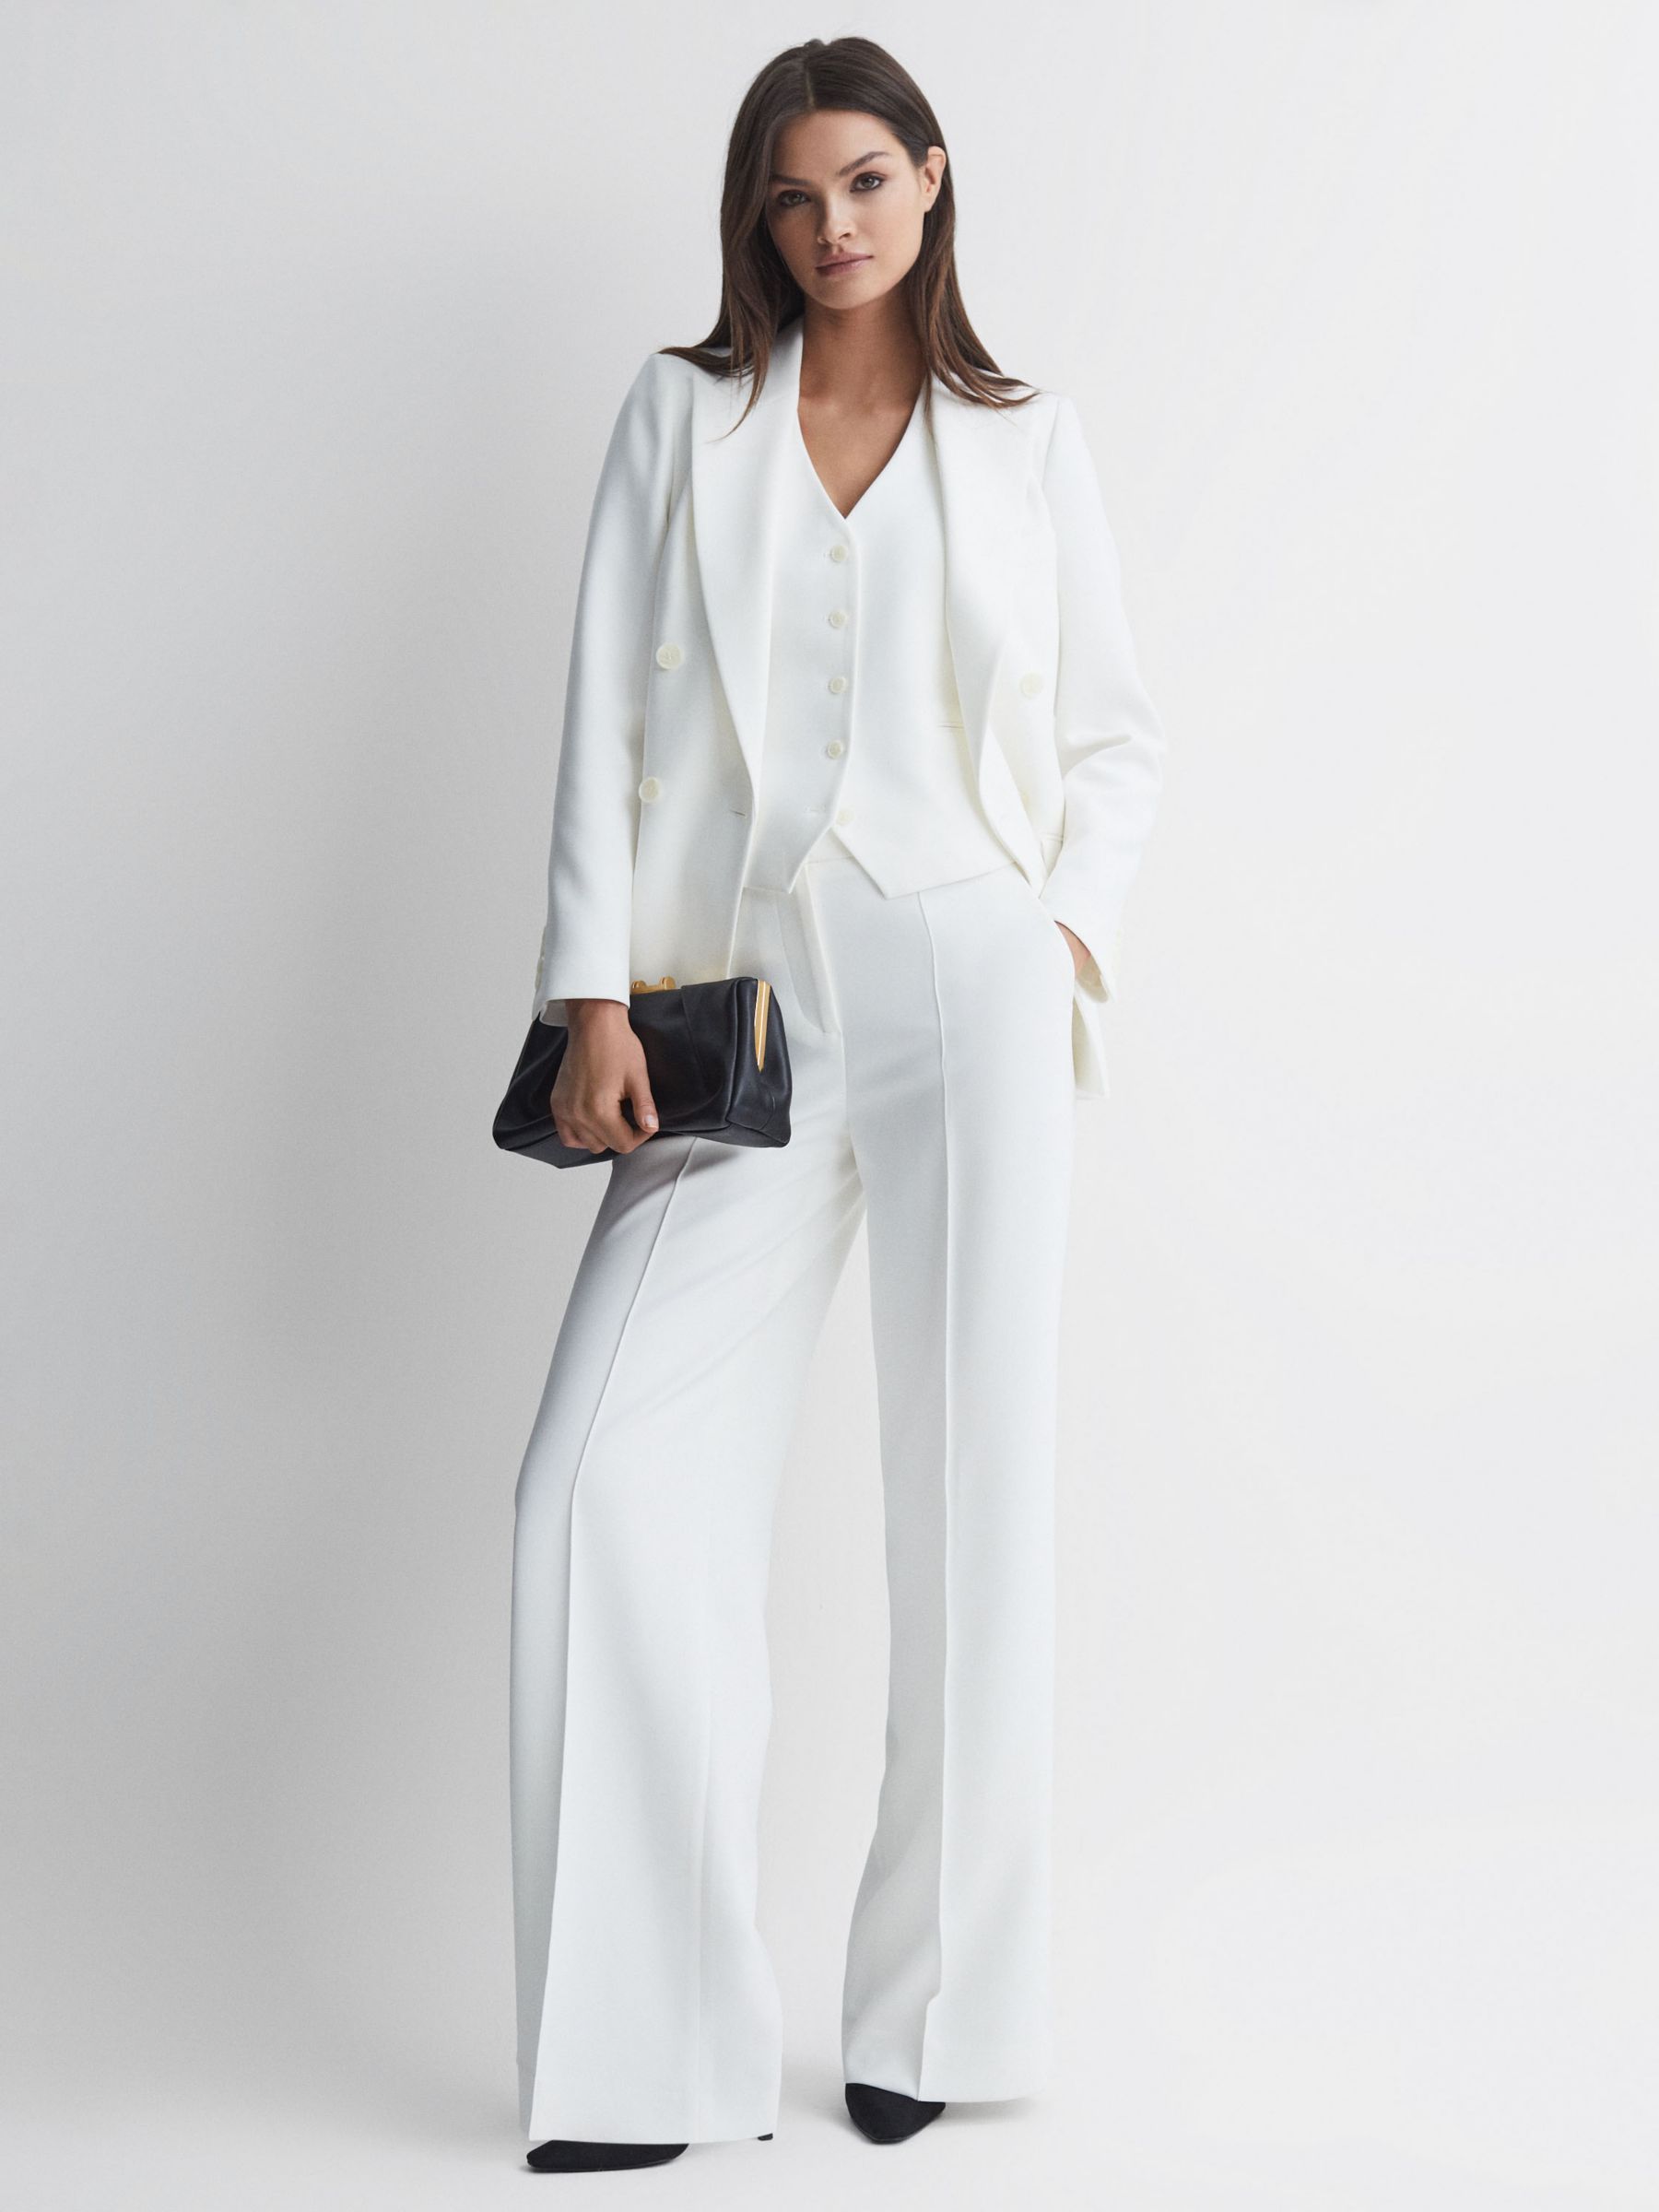 Reiss Sienna Wide Leg Crepe Trousers, White at John Lewis & Partners